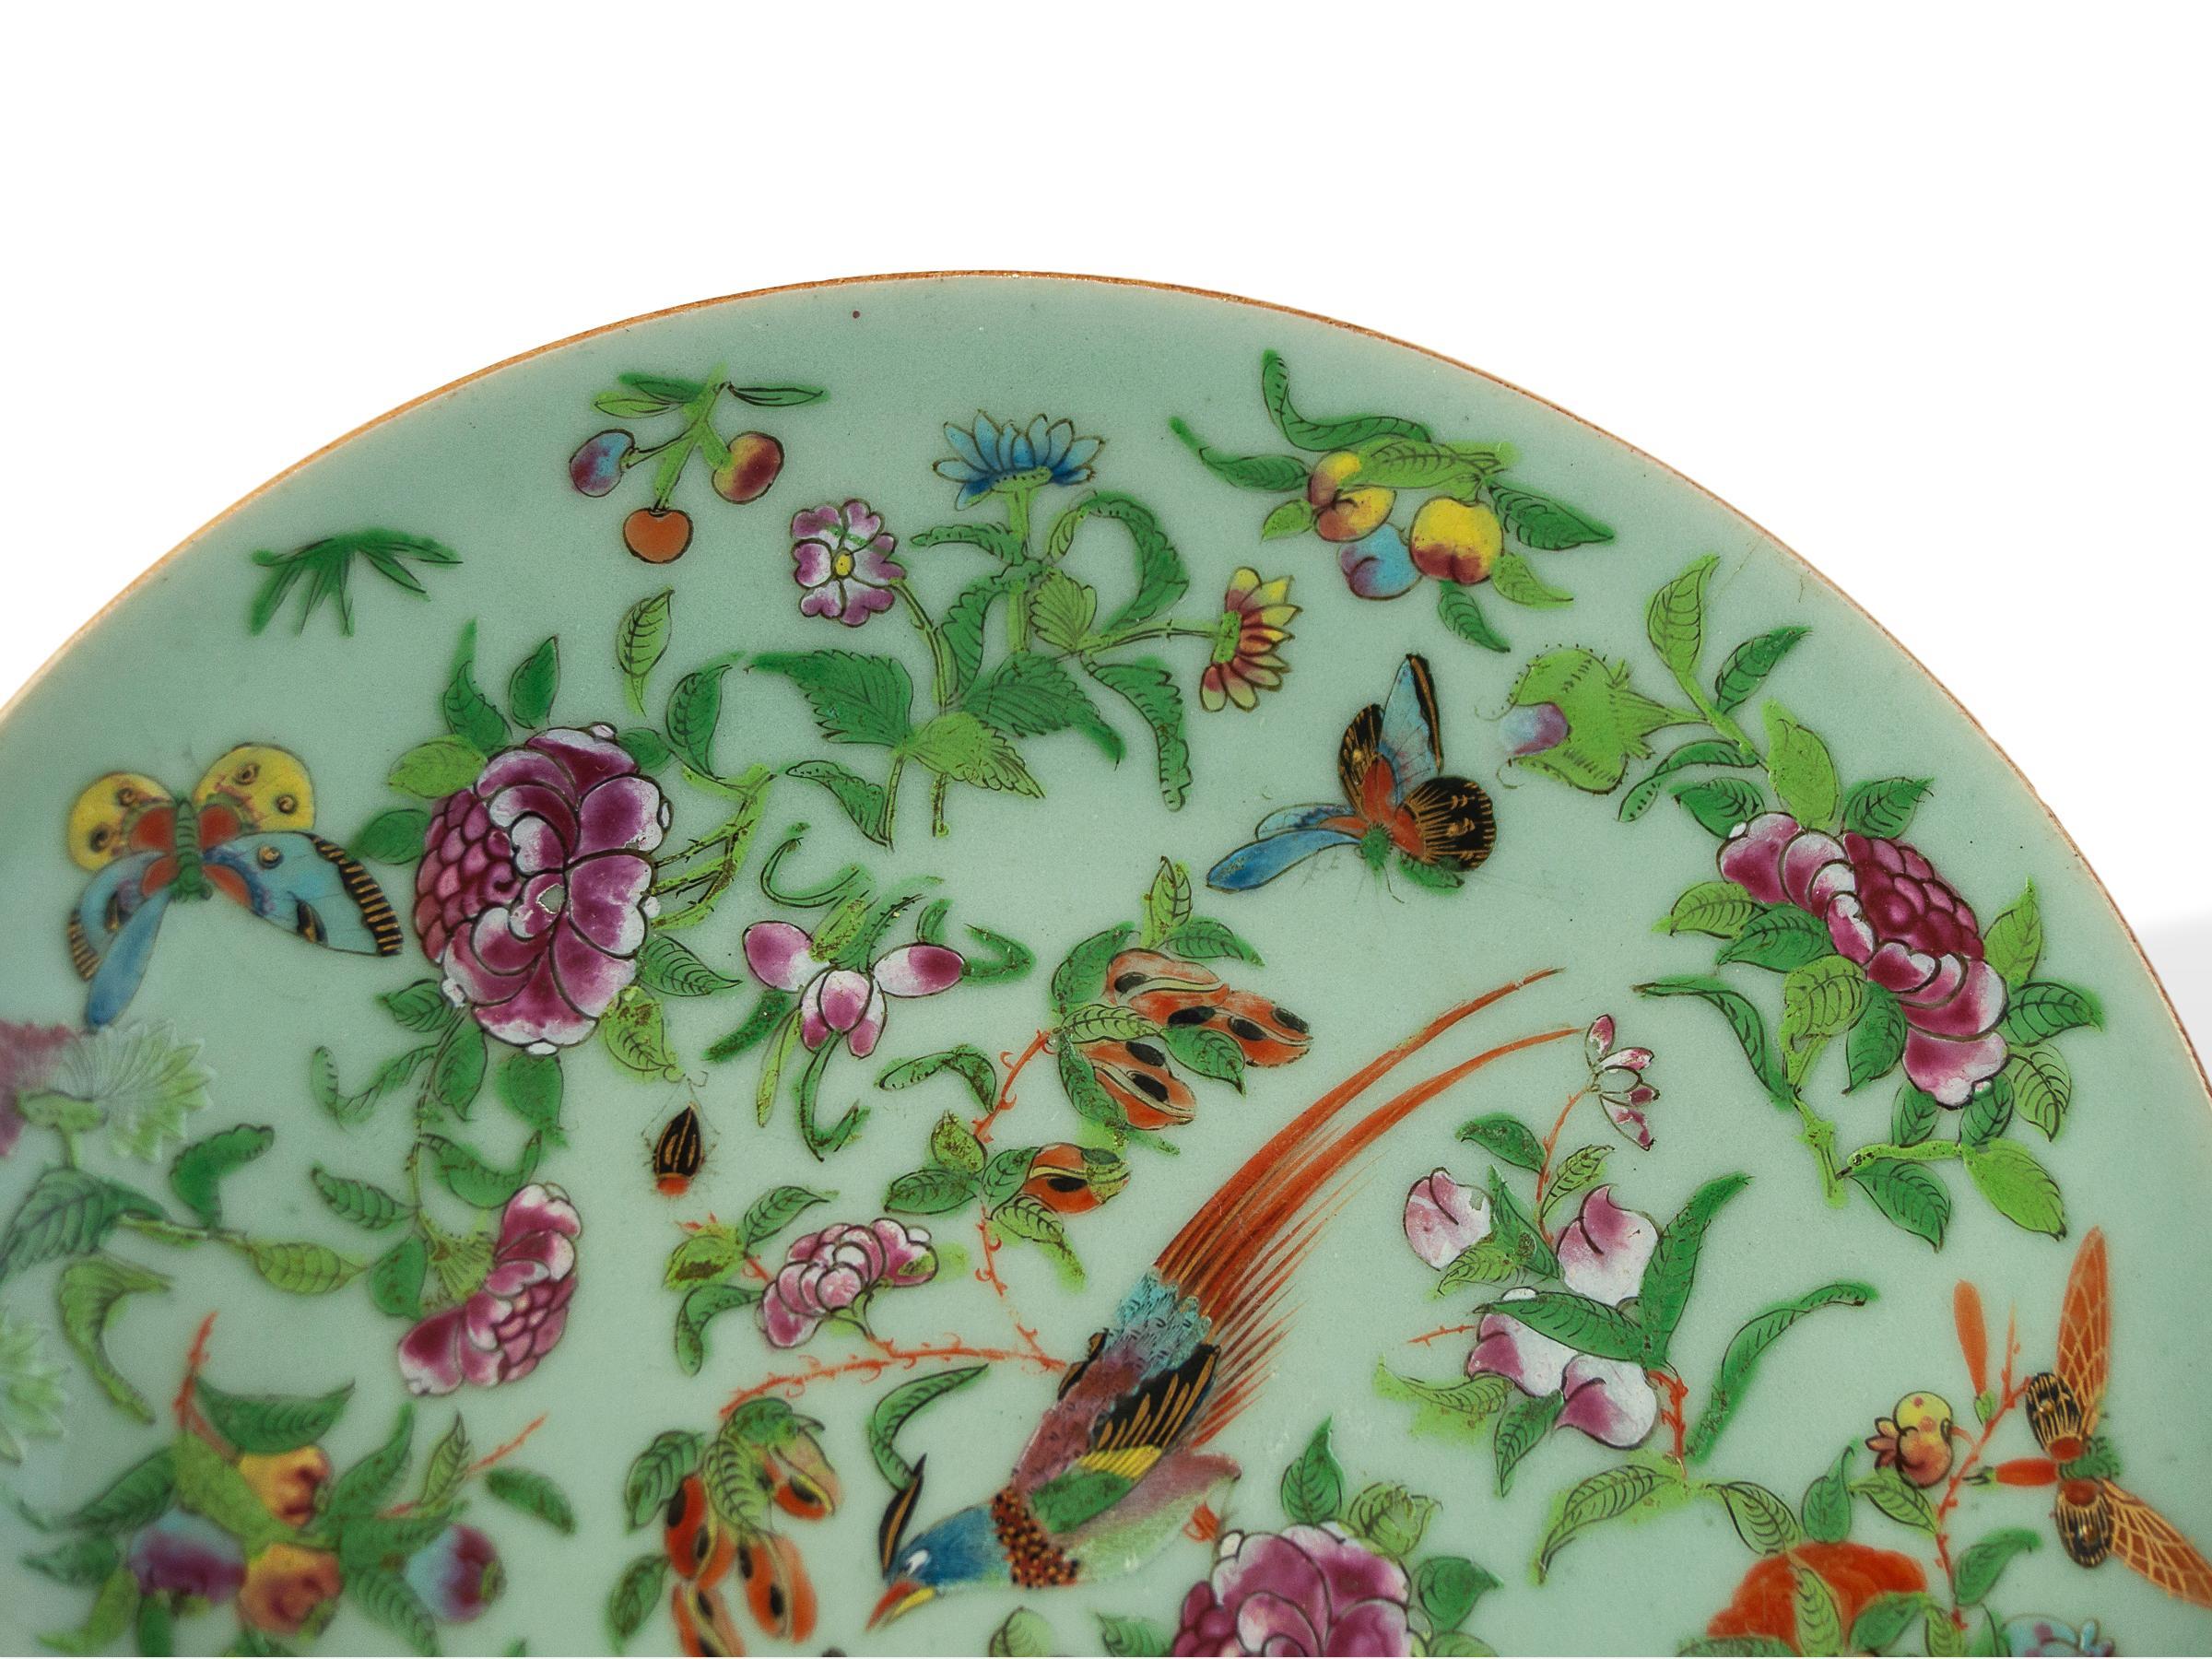 Enameled Chinese Celadon Famille Rose Plate, Canton, ca. 1850